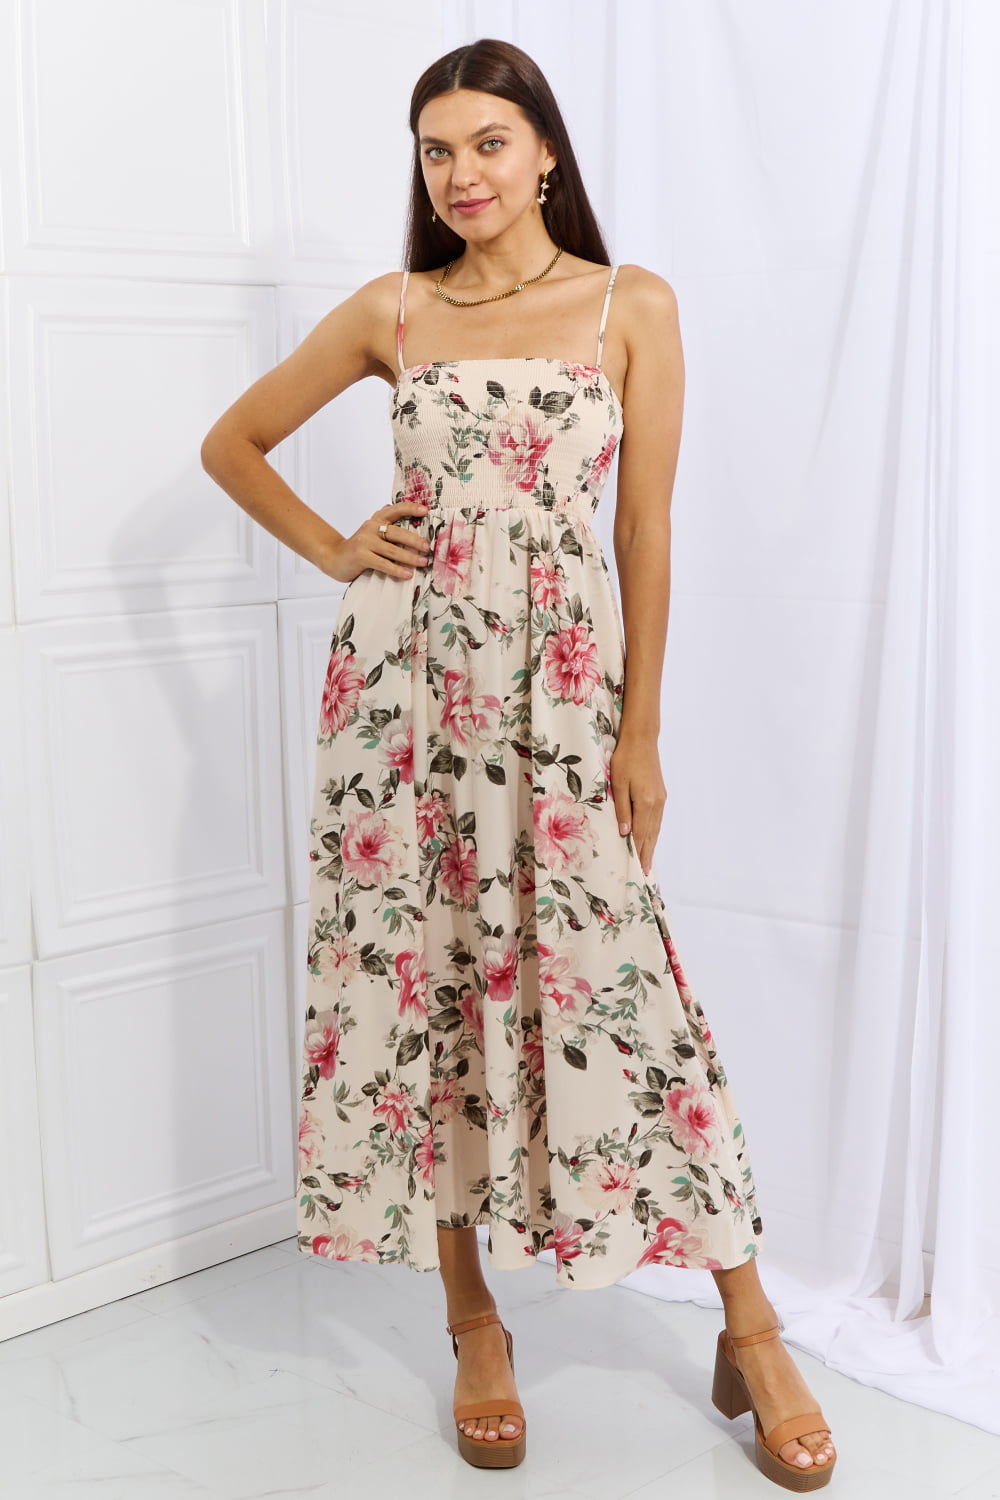 OneTheLand Hold Me Tight Sleevless Floral Maxi Dress in Pink Floral Dress